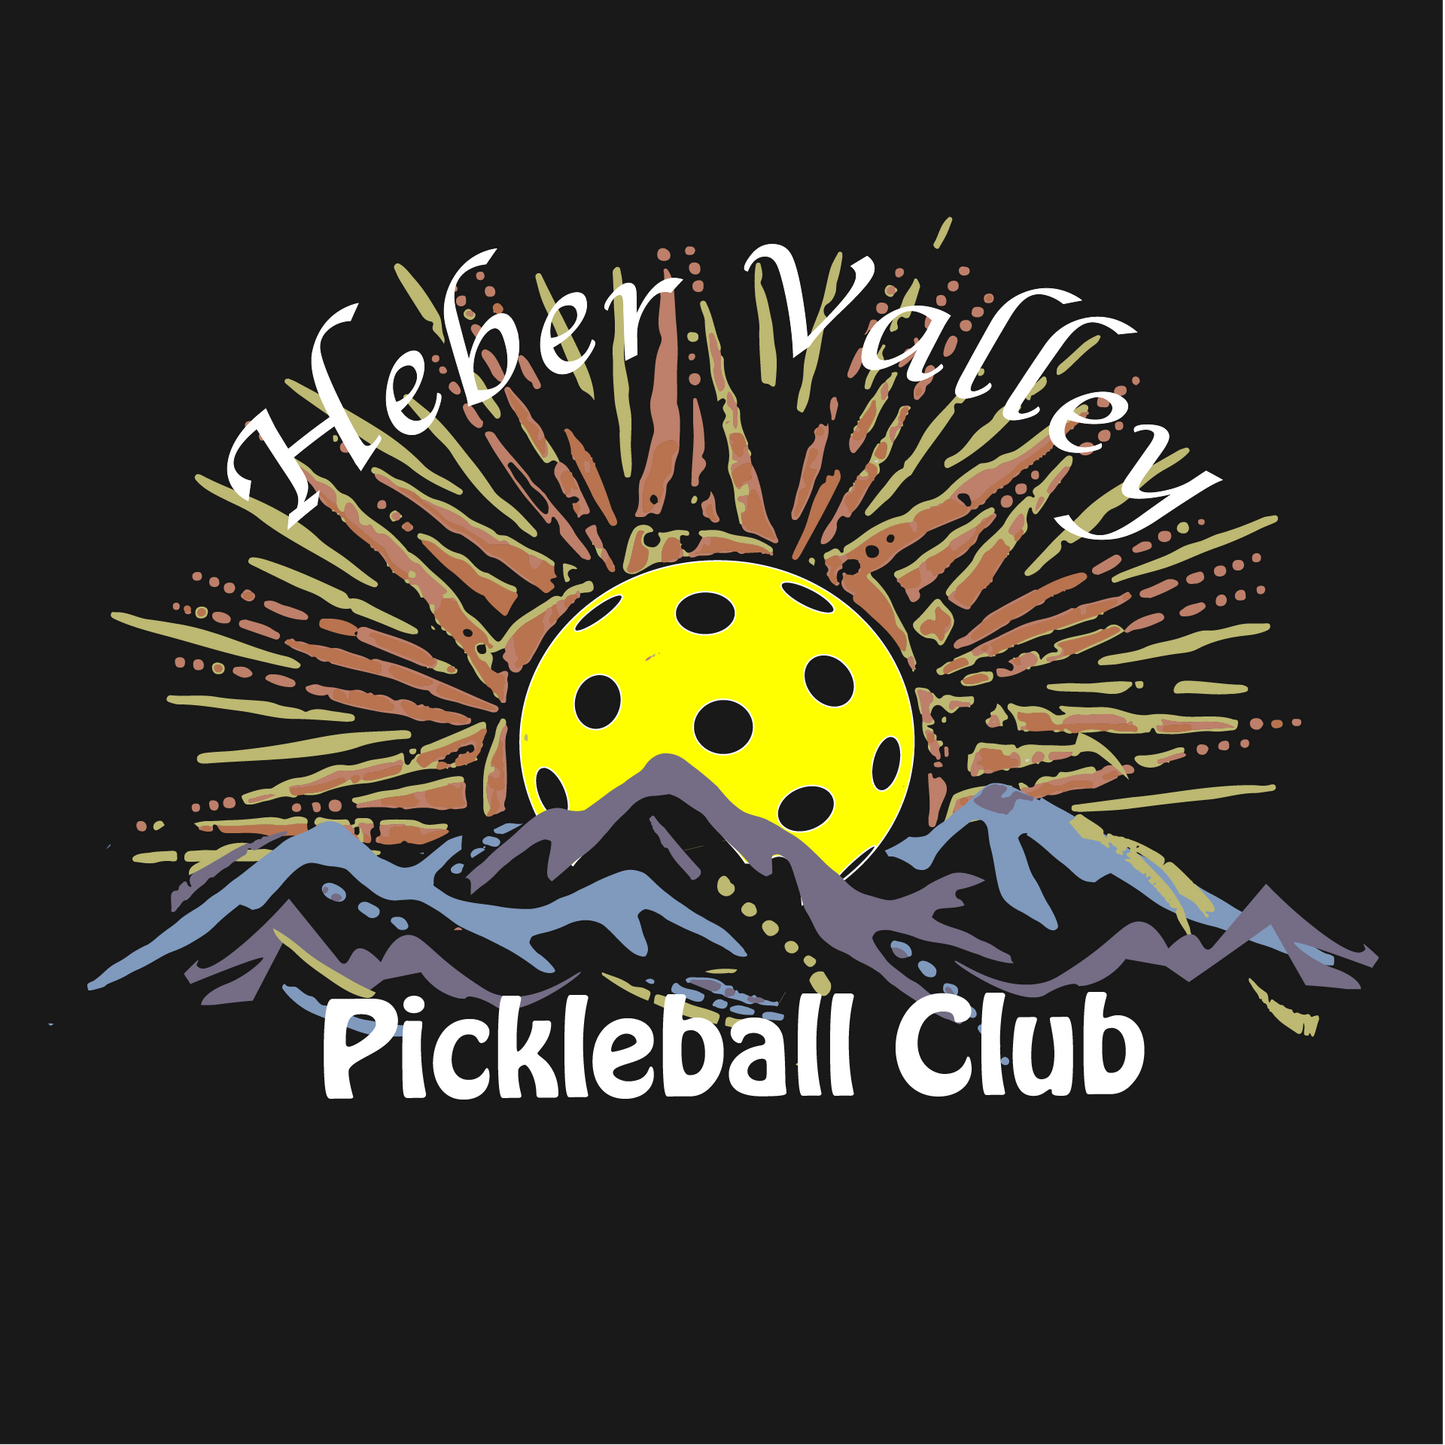 Heber Valley Pickleball Club (Customizable) | Women’s 1/4 Zip Pullover Athletic Shirt | 100% Polyester